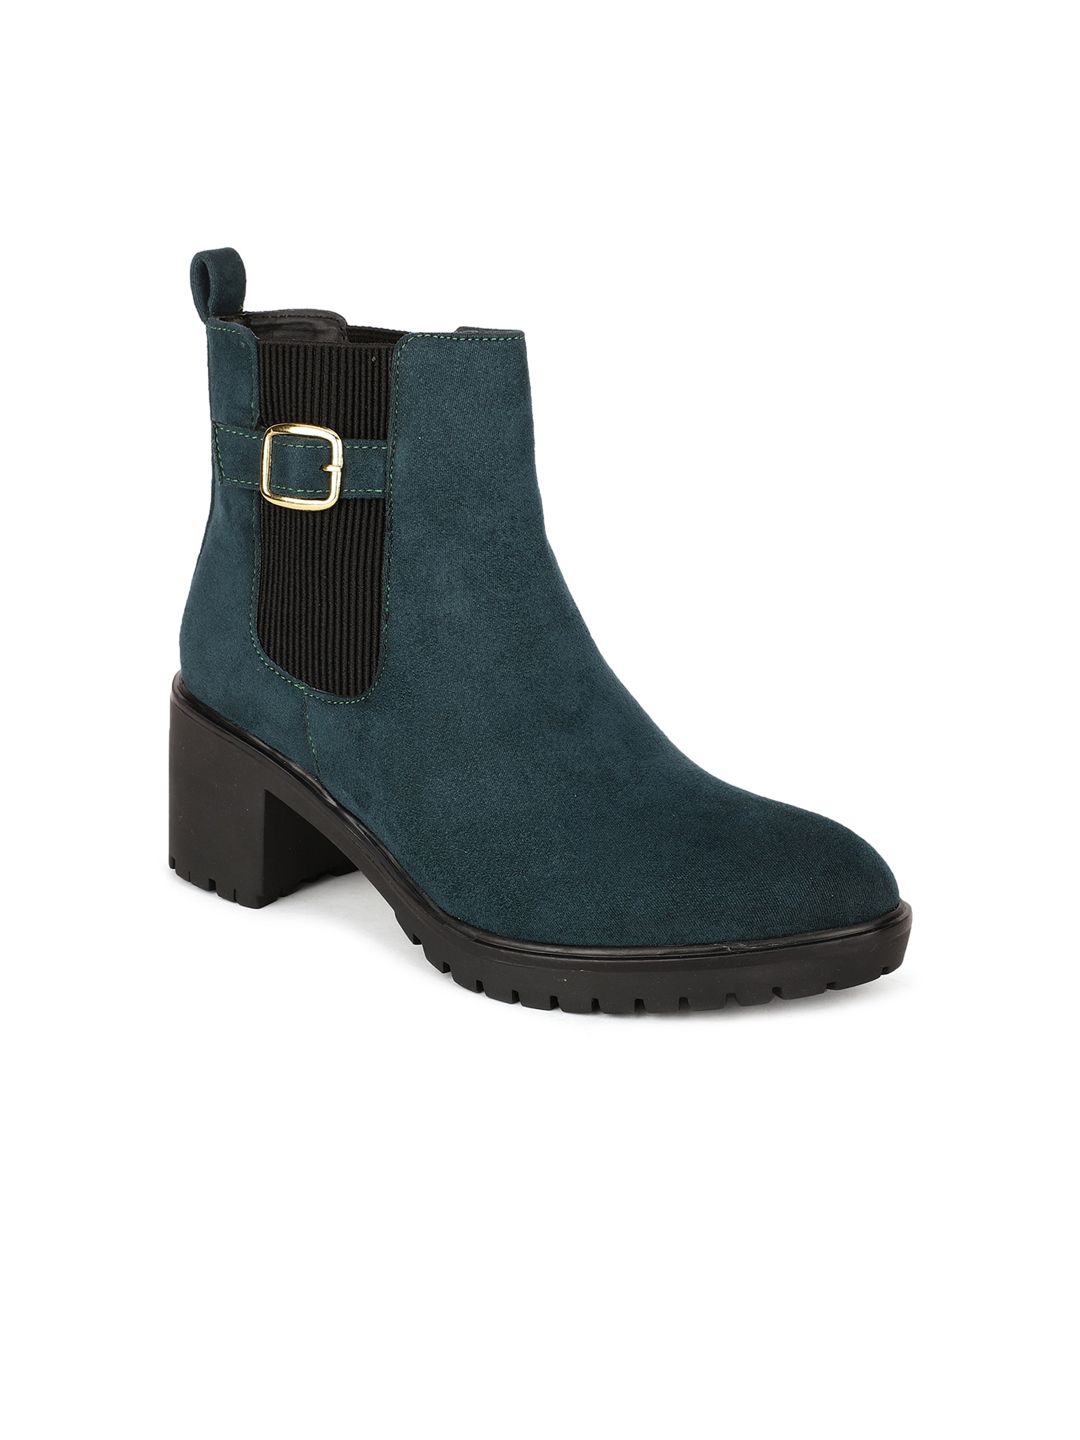 Bruno Manetti Women Green Suede Block Heeled Boots with Buckles Price in India